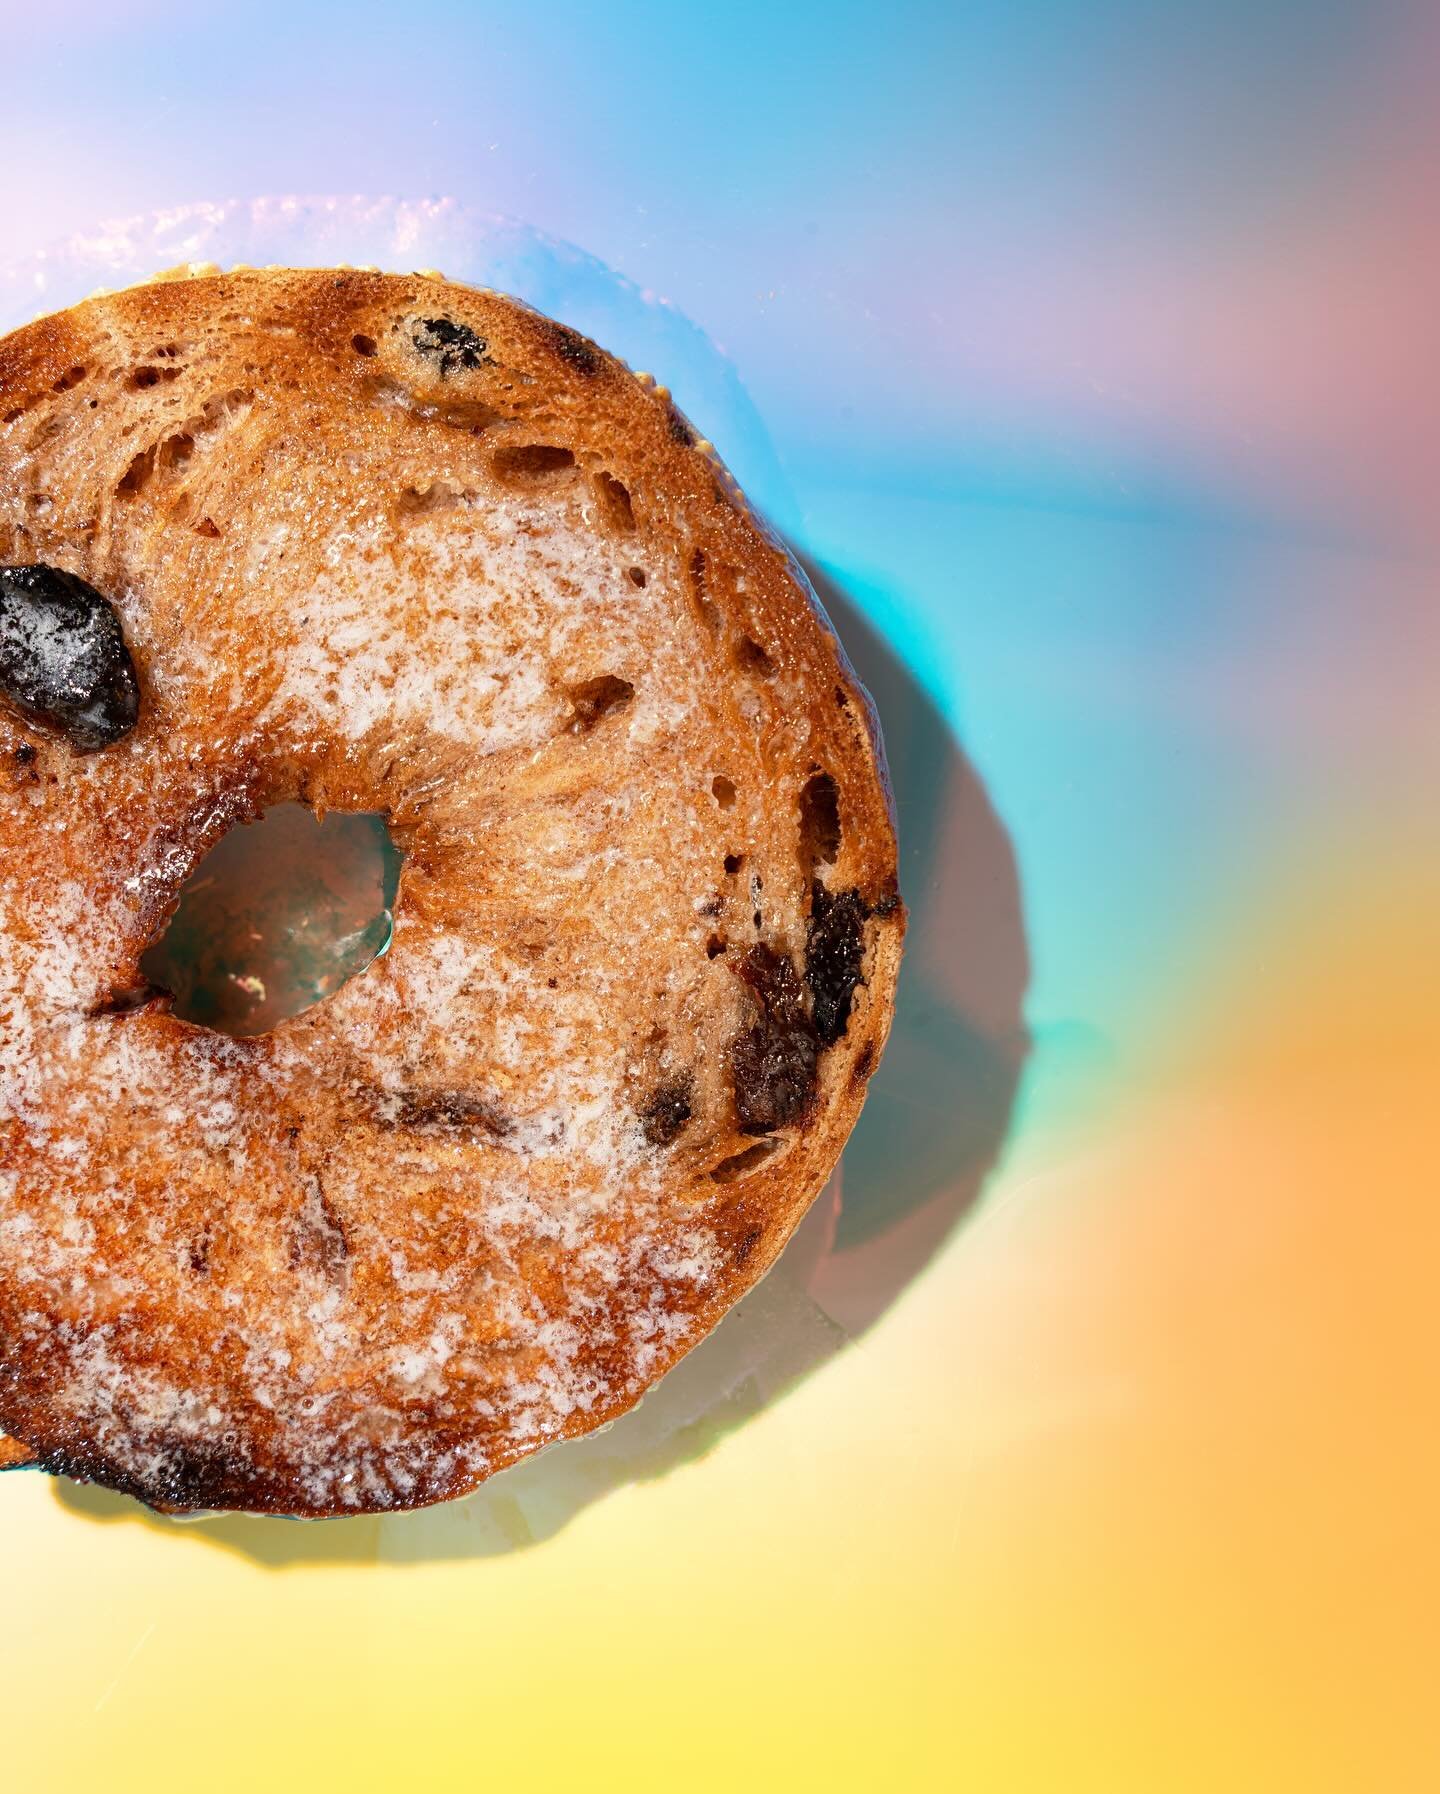 Introducing the Cinnamon Raisin Bagel from Original Sunshine. A perfect blend of sweet crunch and irresistible flavor.

The GF cinnamon raisin bagel is a limited time offer, exclusively available at three special shops: @bagelandslice in LA and @tomp